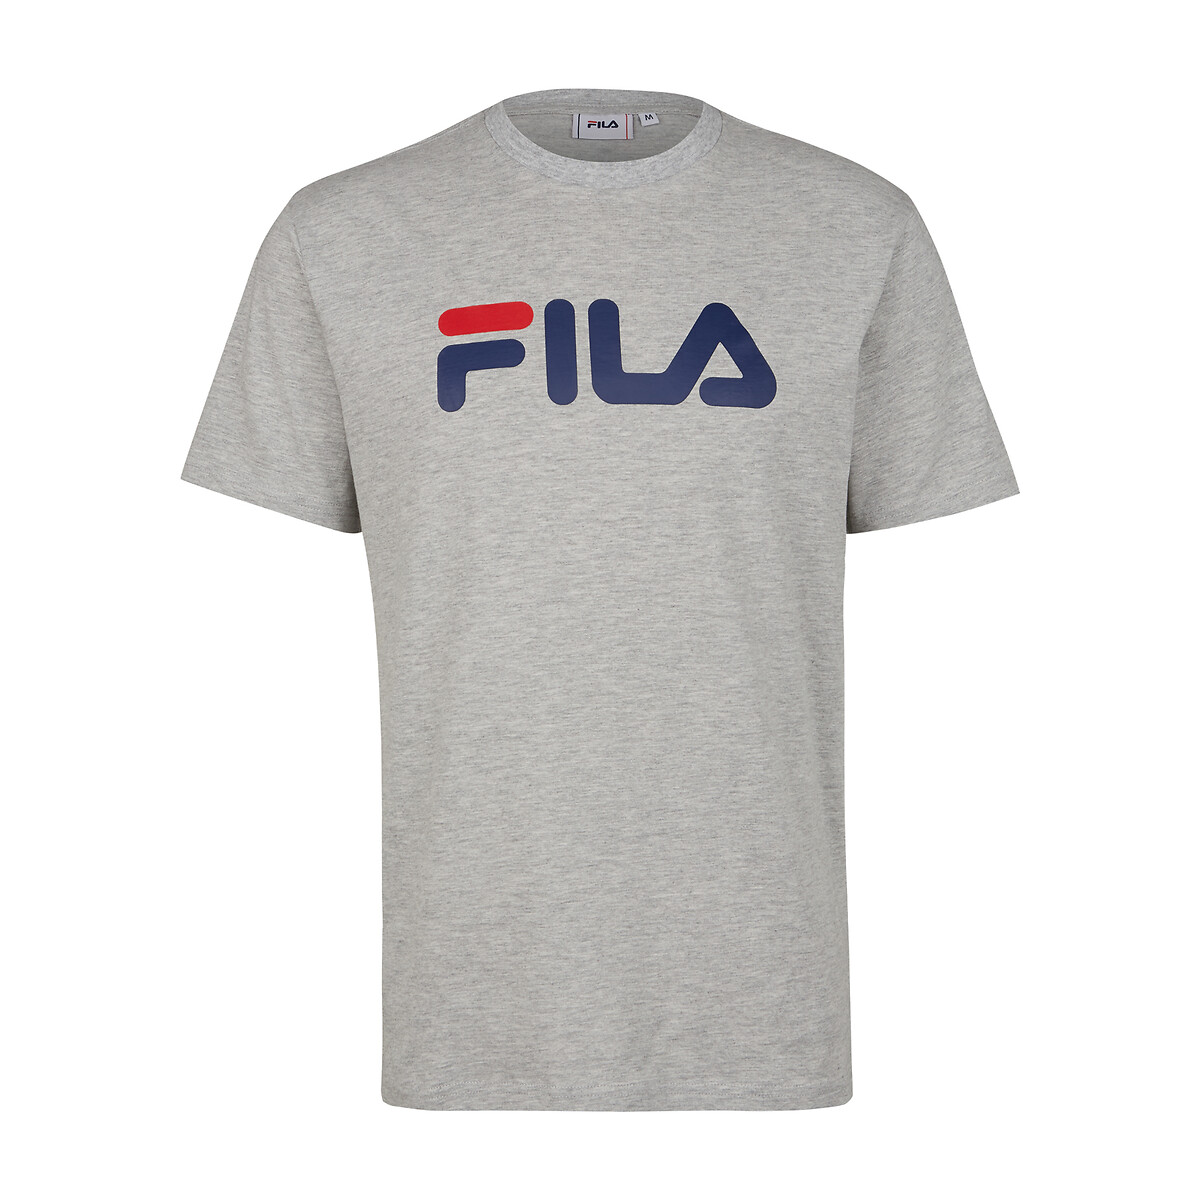 Foundation Cotton T-Shirt with Large Logo Print and Short Sleeves